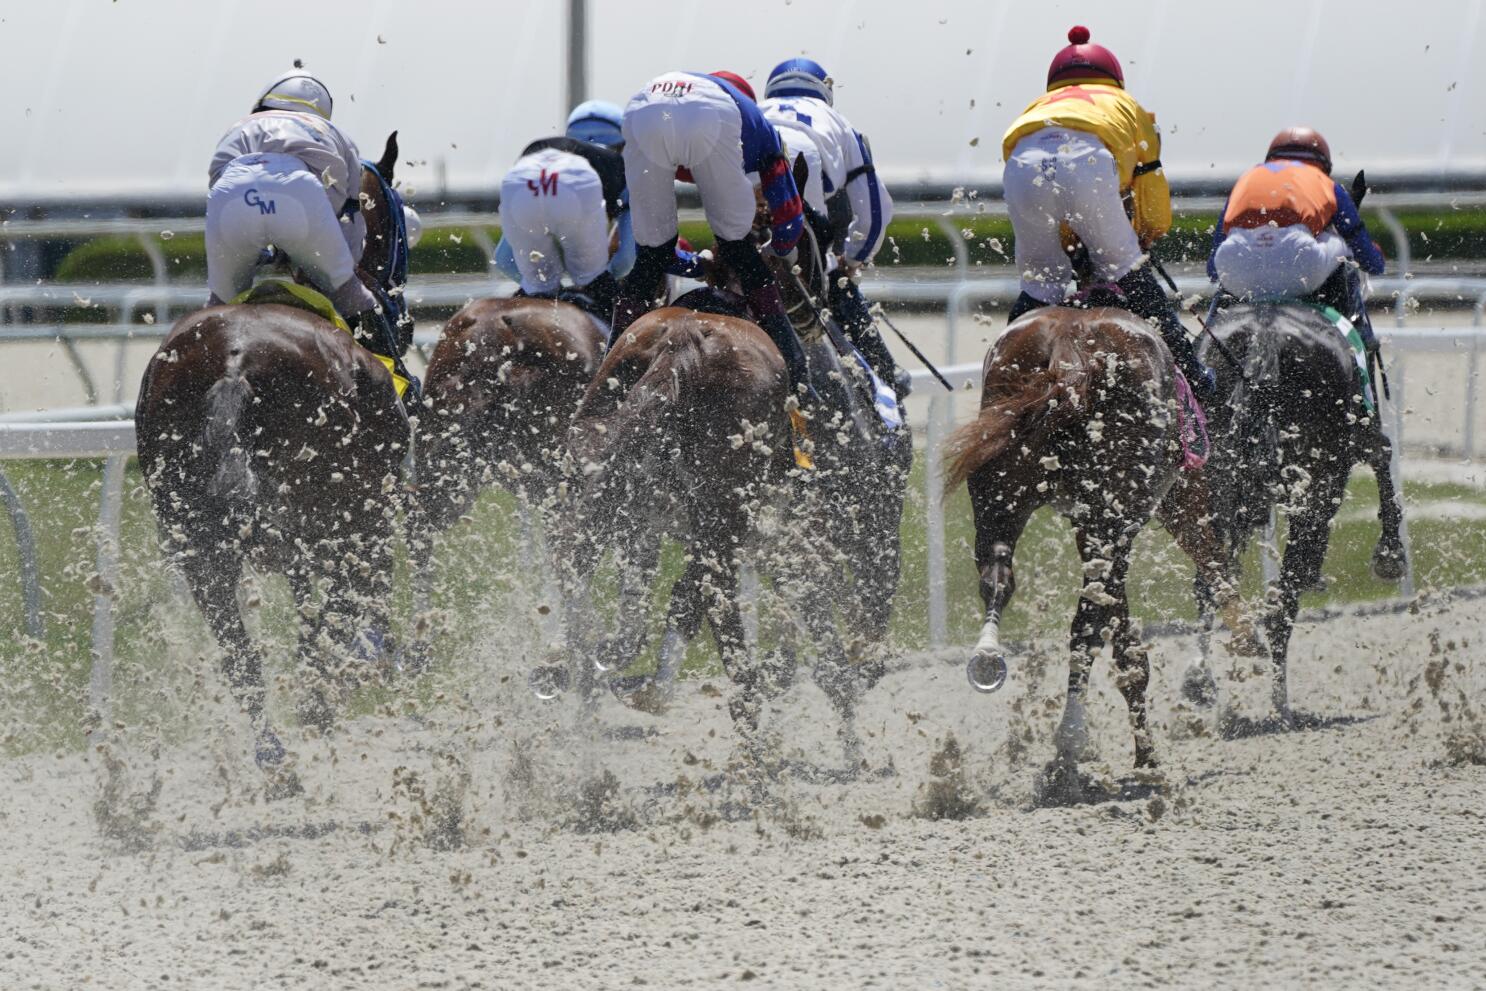 Synthetic surfaces gaining traction at major horse racing tracks - The San Diego Union-Tribune